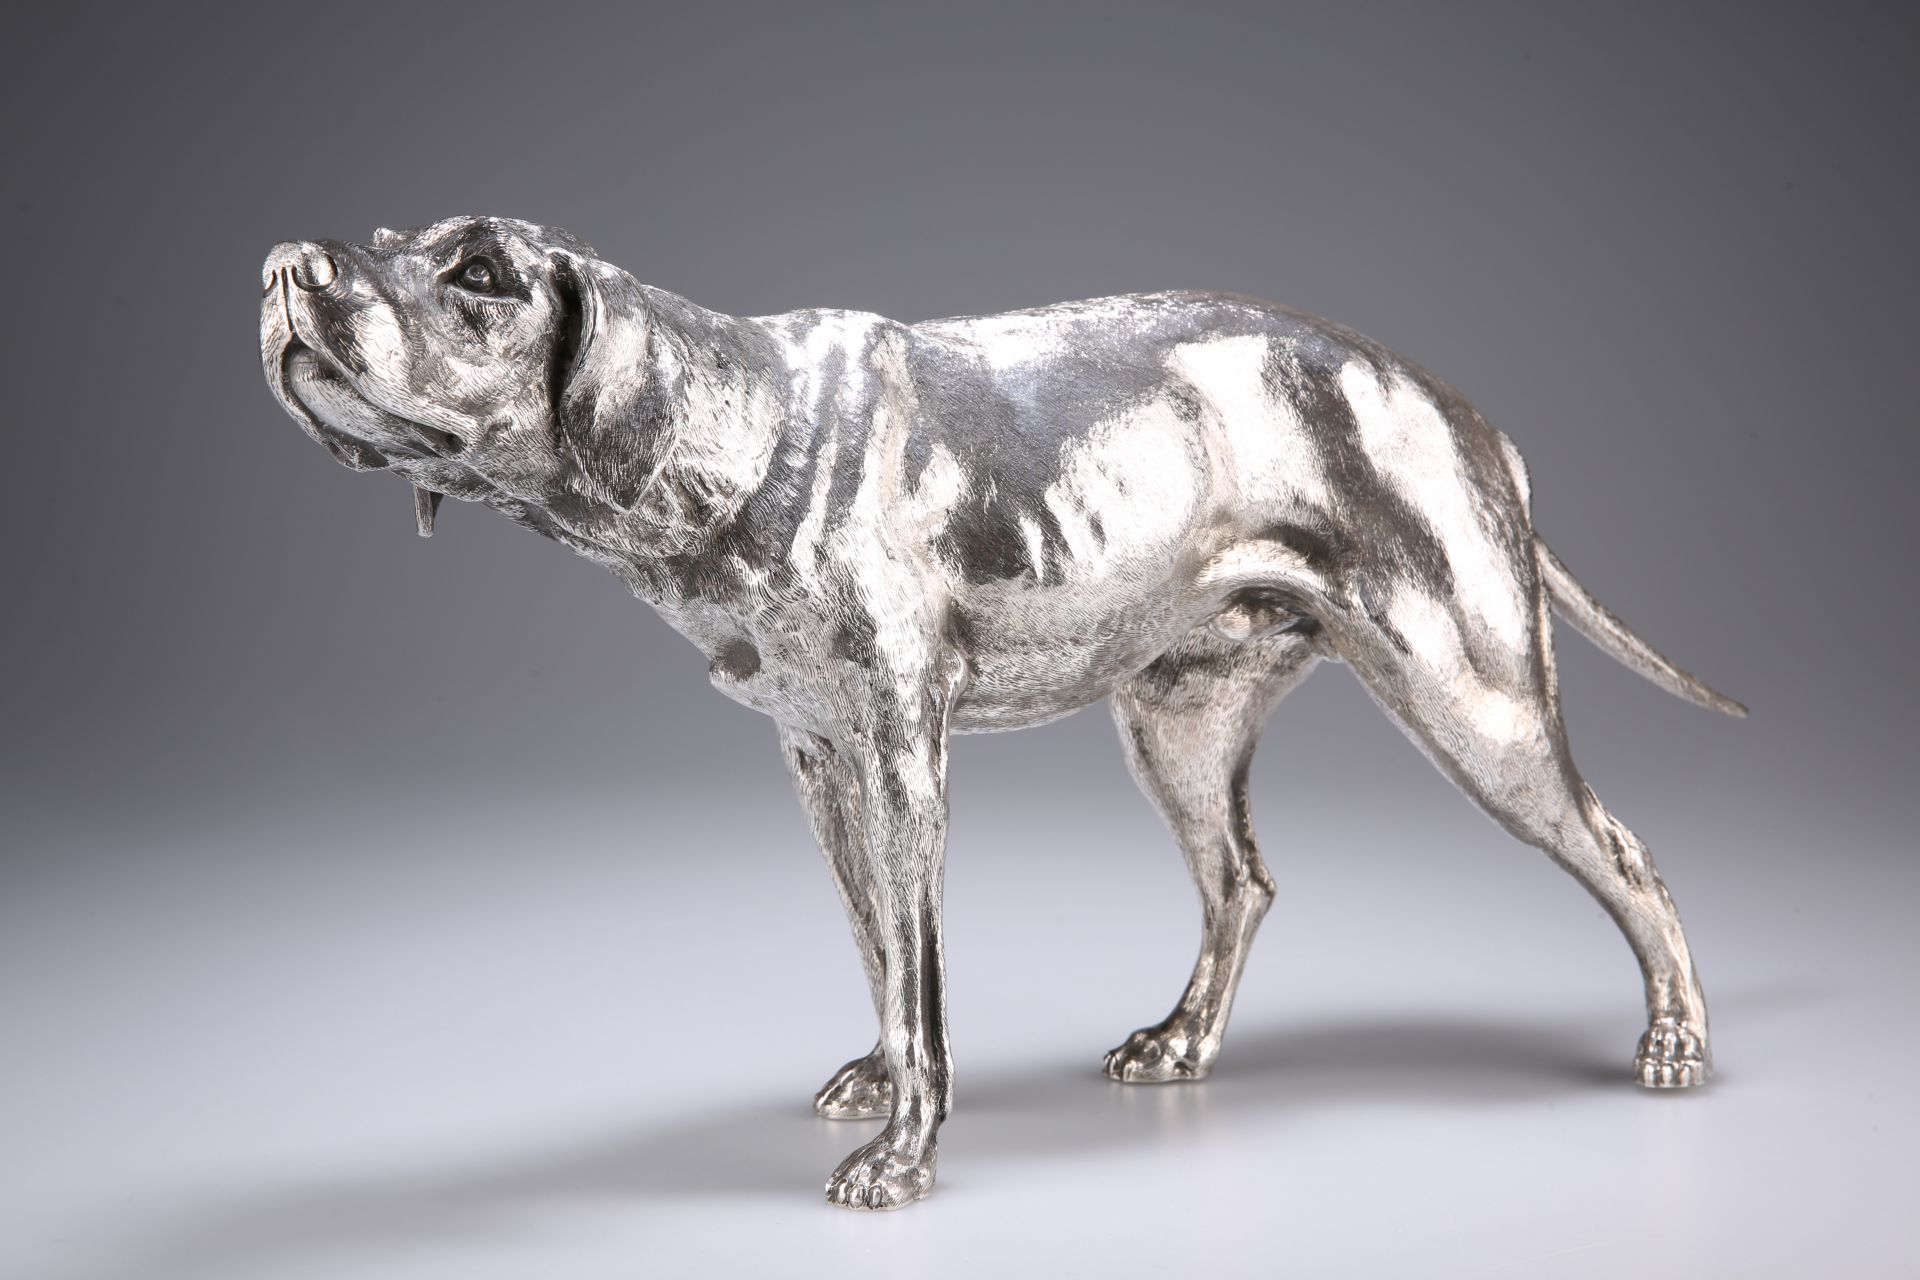 A LARGE GERMAN SILVER MODEL OF A WEIMARANER, 20TH CENTURY, lacking maker's mark, the dog modelled